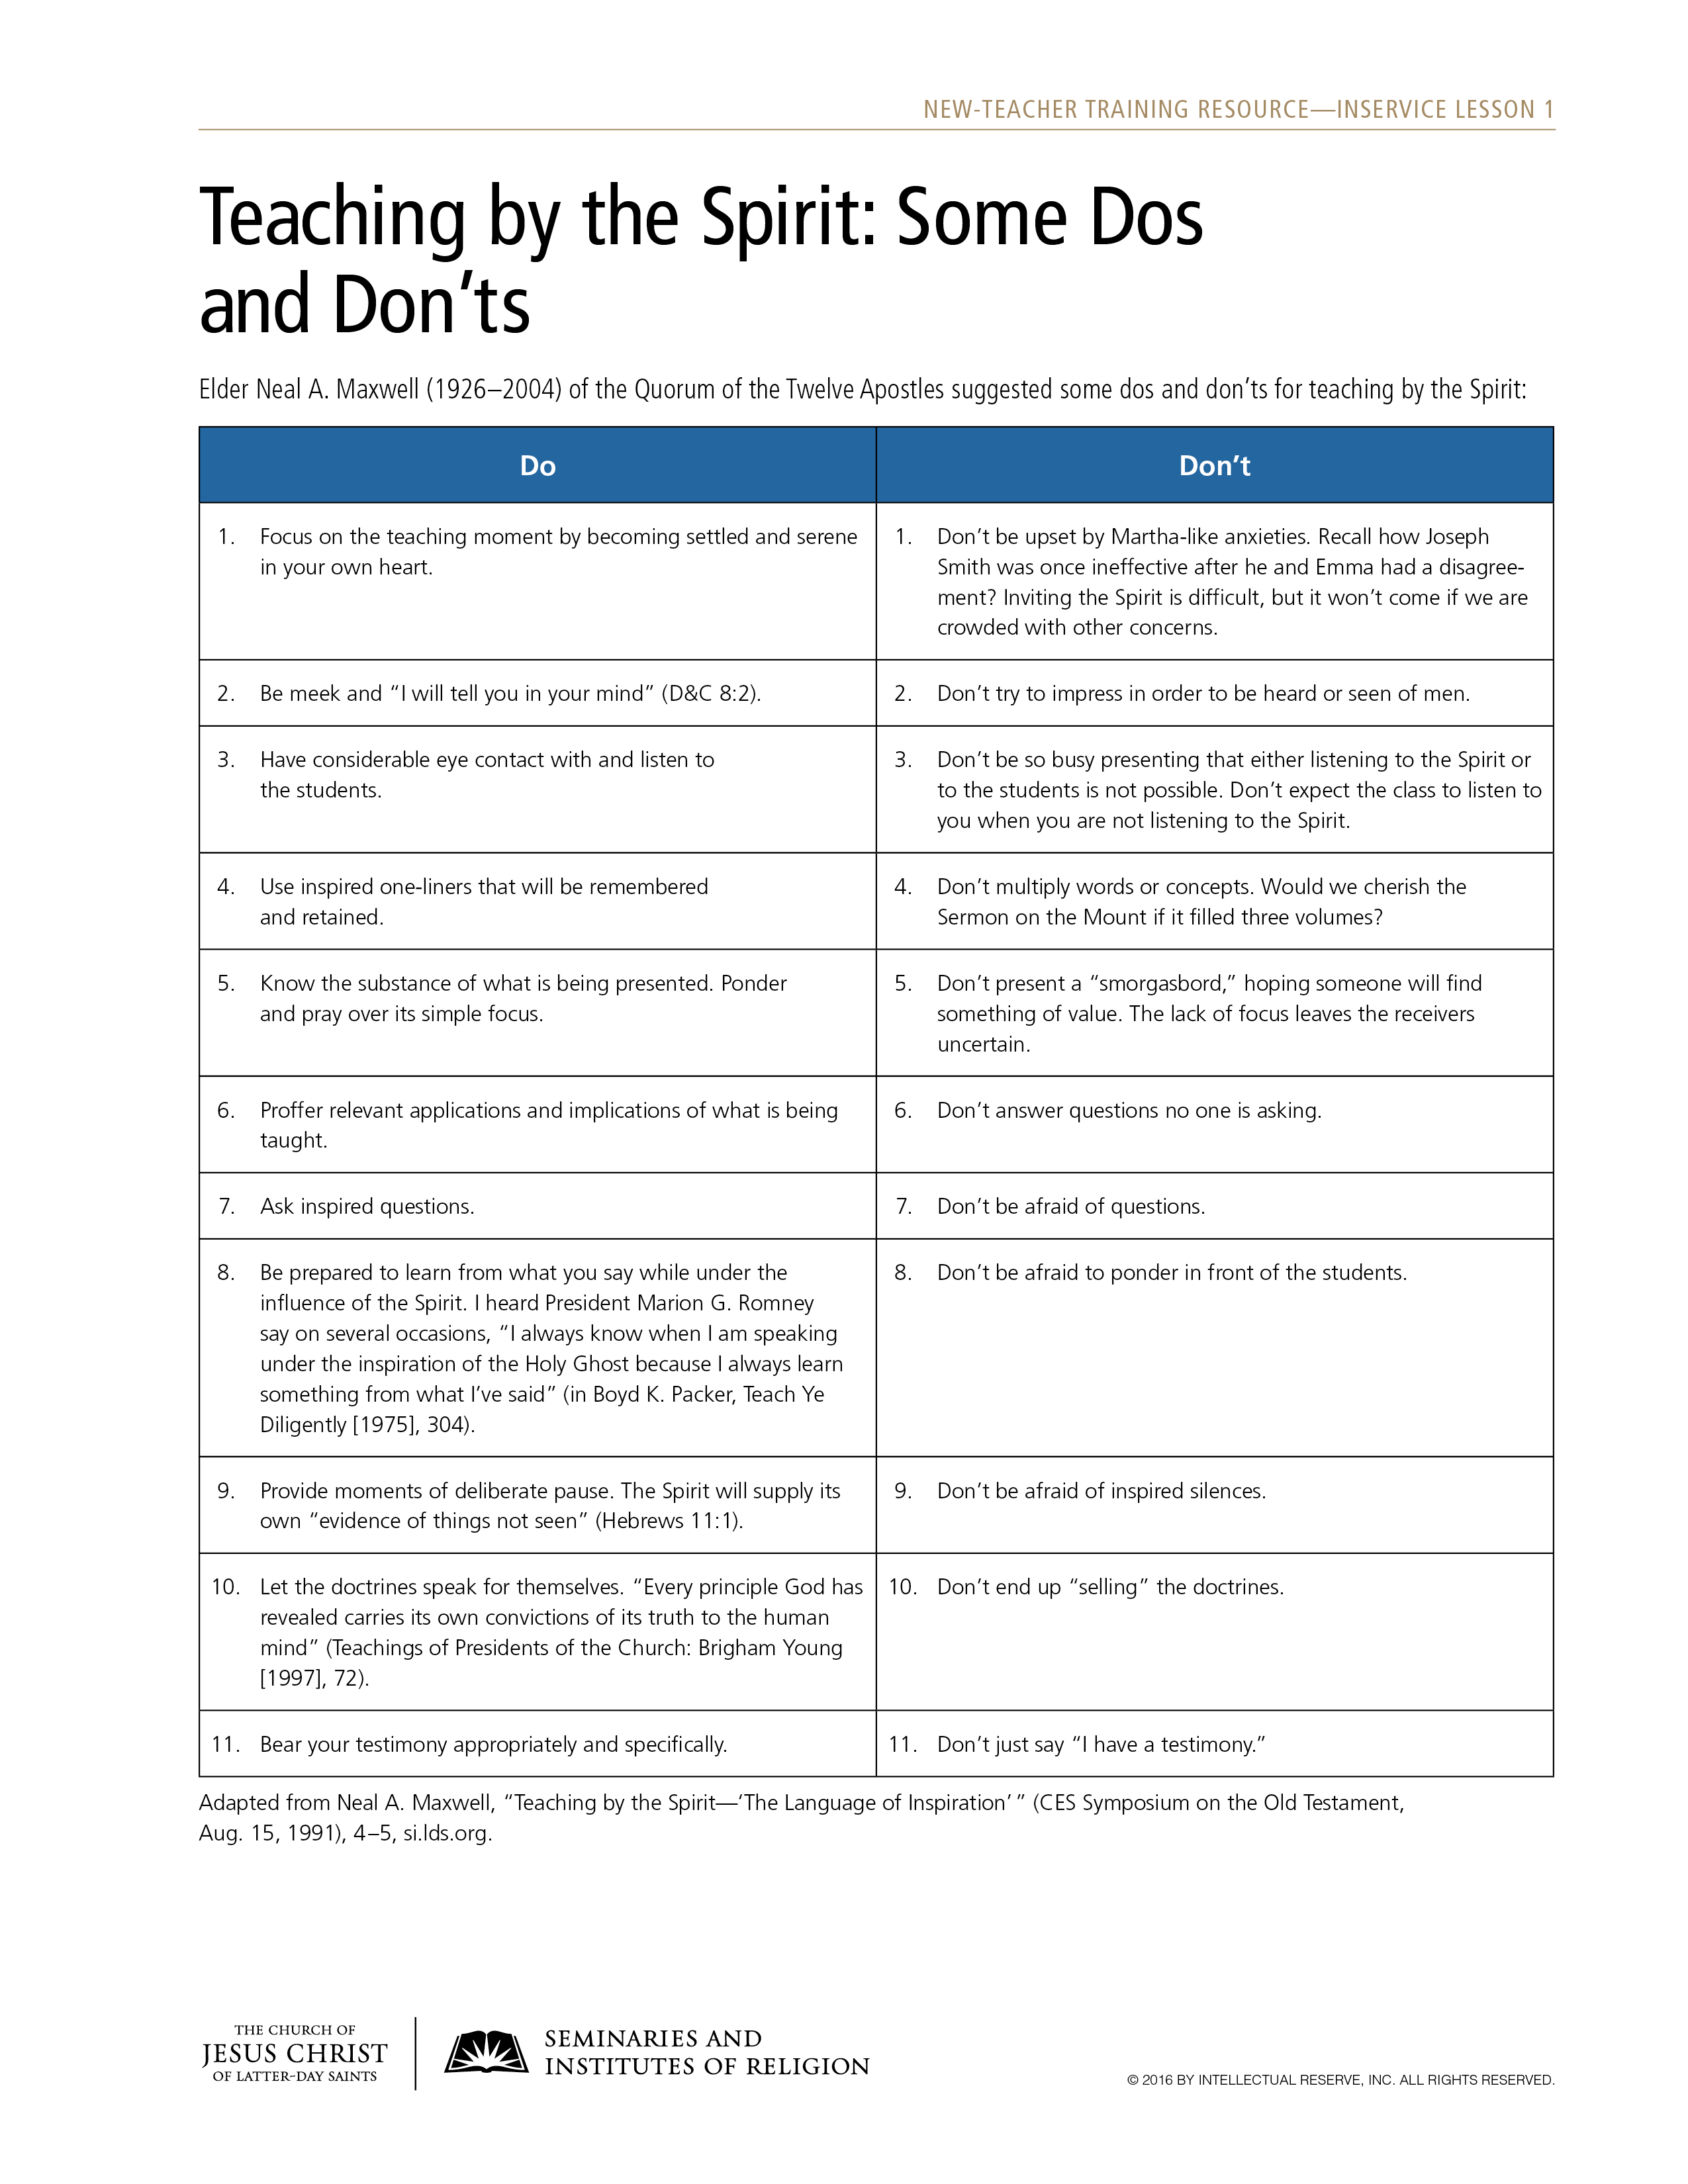 handout, Teaching by the Spirit: Some Dos and Don’ts